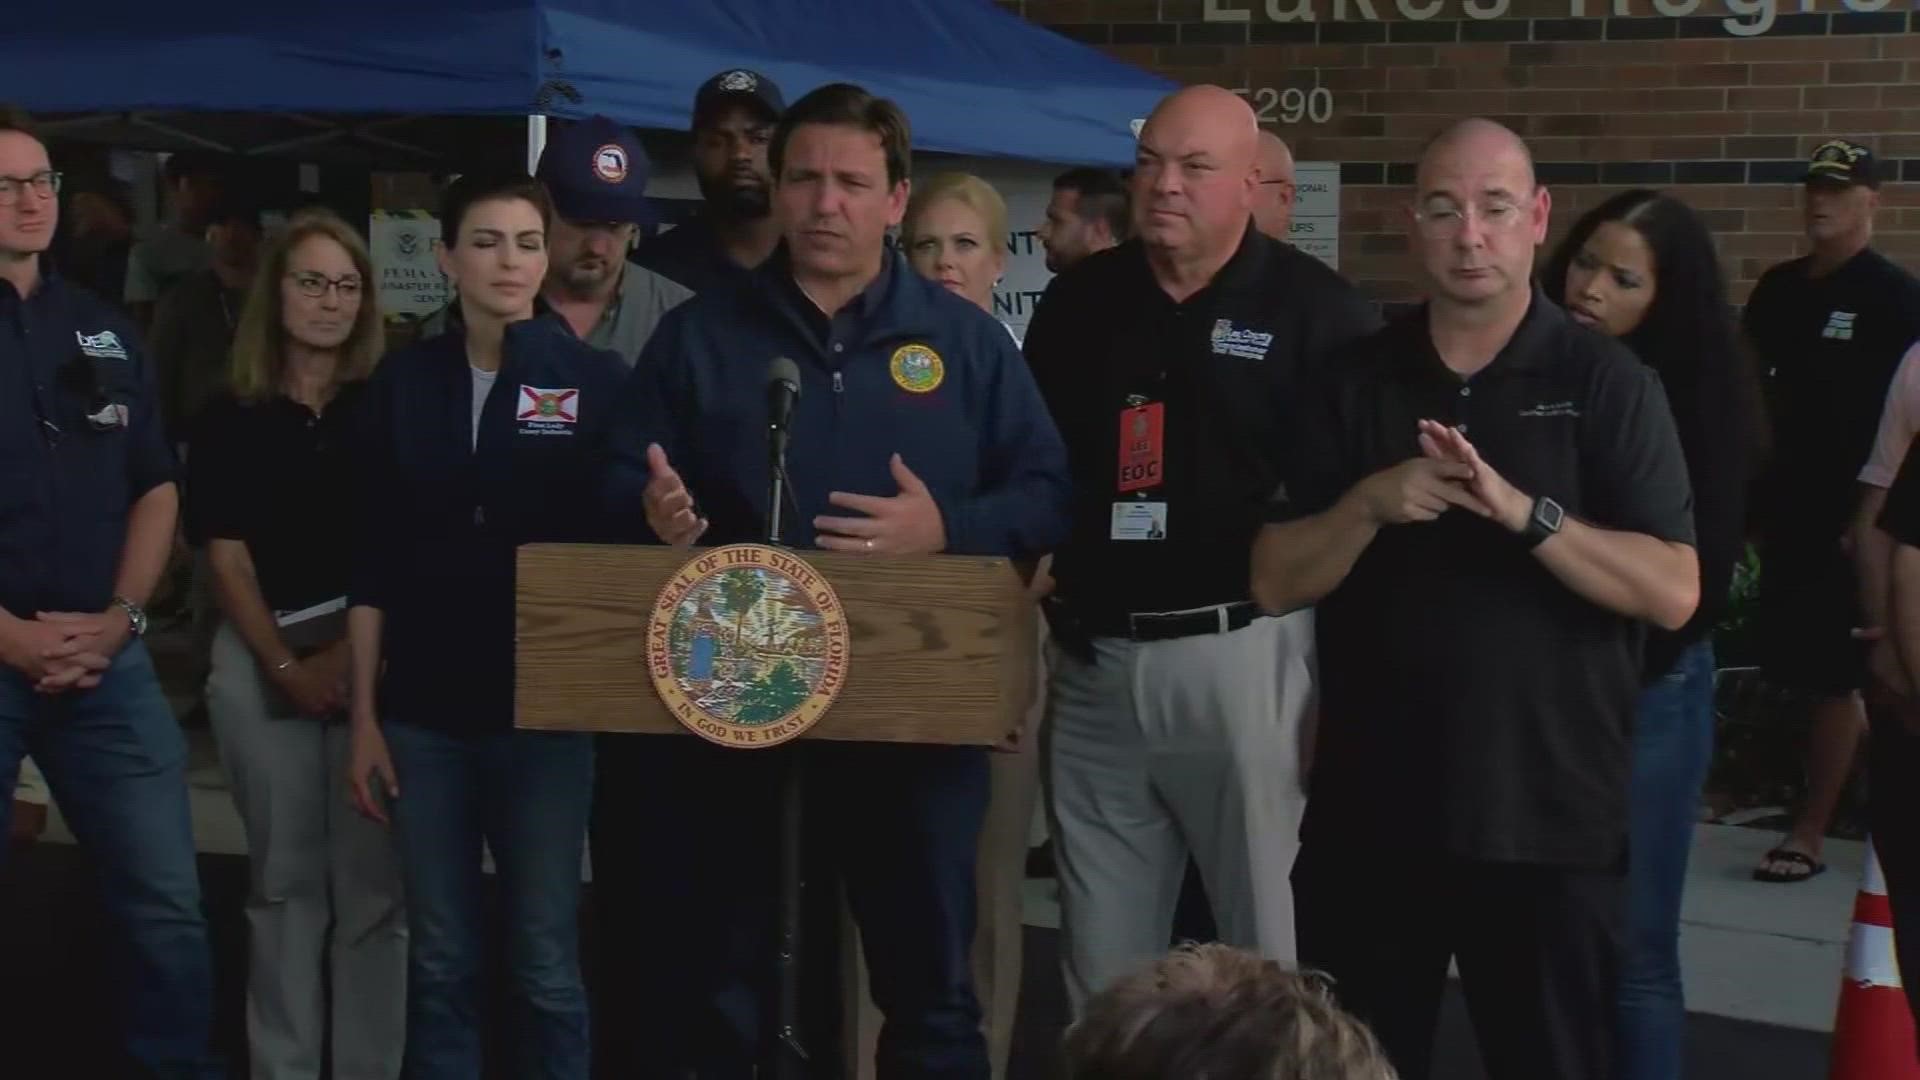 The center will help provide aid for people and businesses impacted by Hurricane Ian.